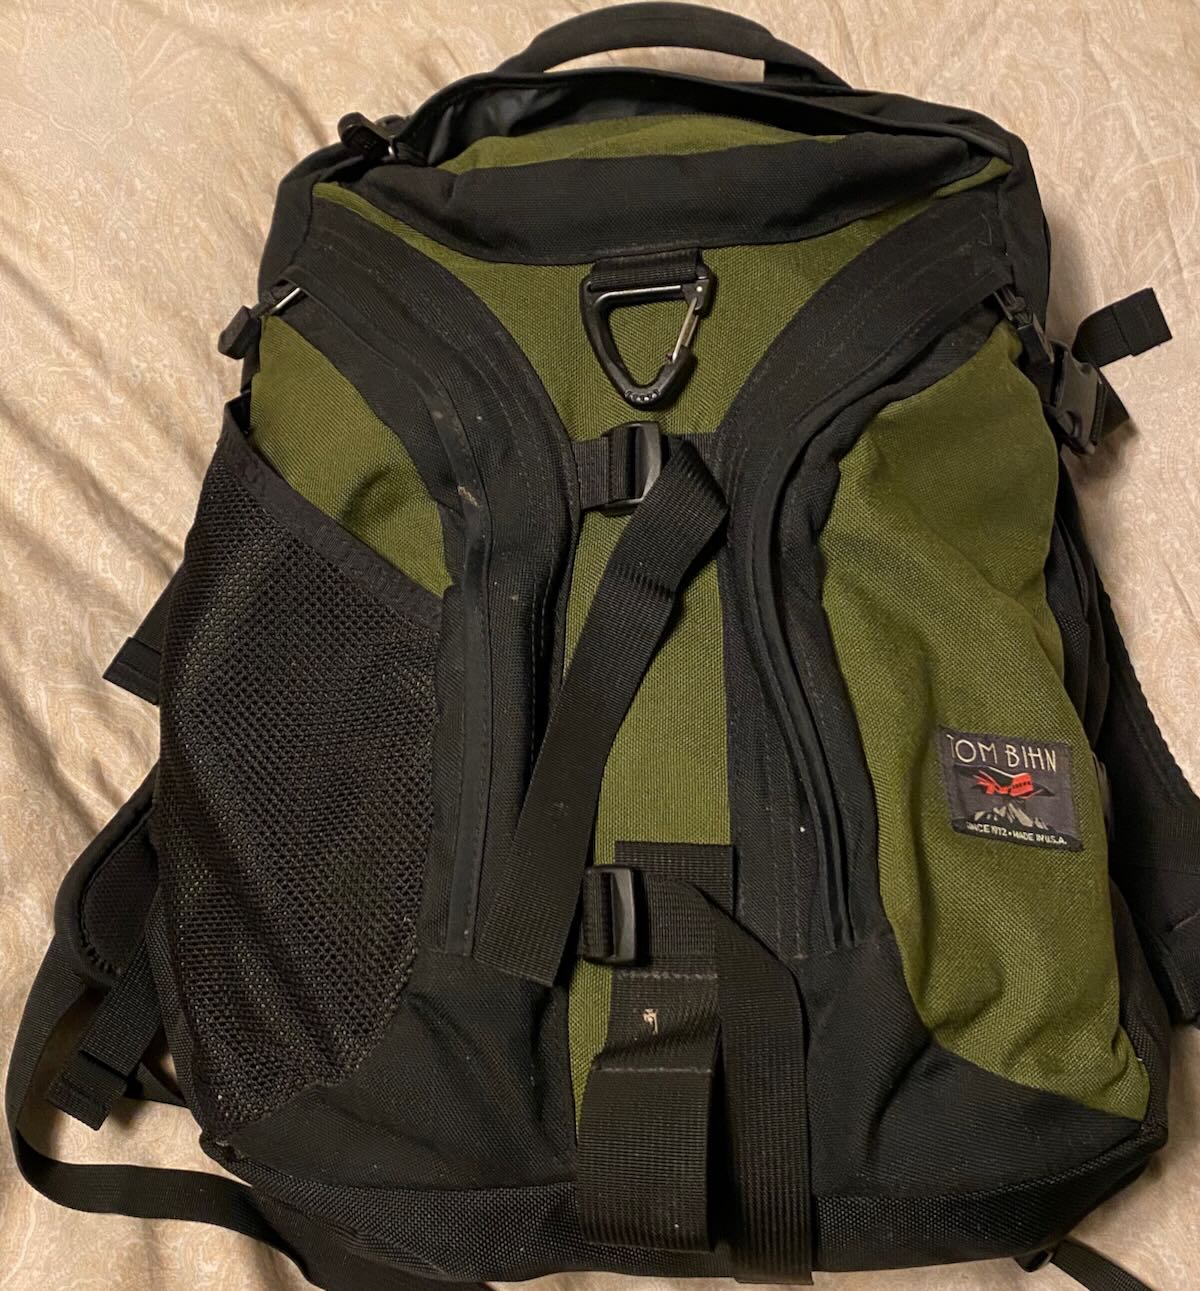 David’s field radio kit makes use of Tom Bihn packs and pouches | Q R P e r